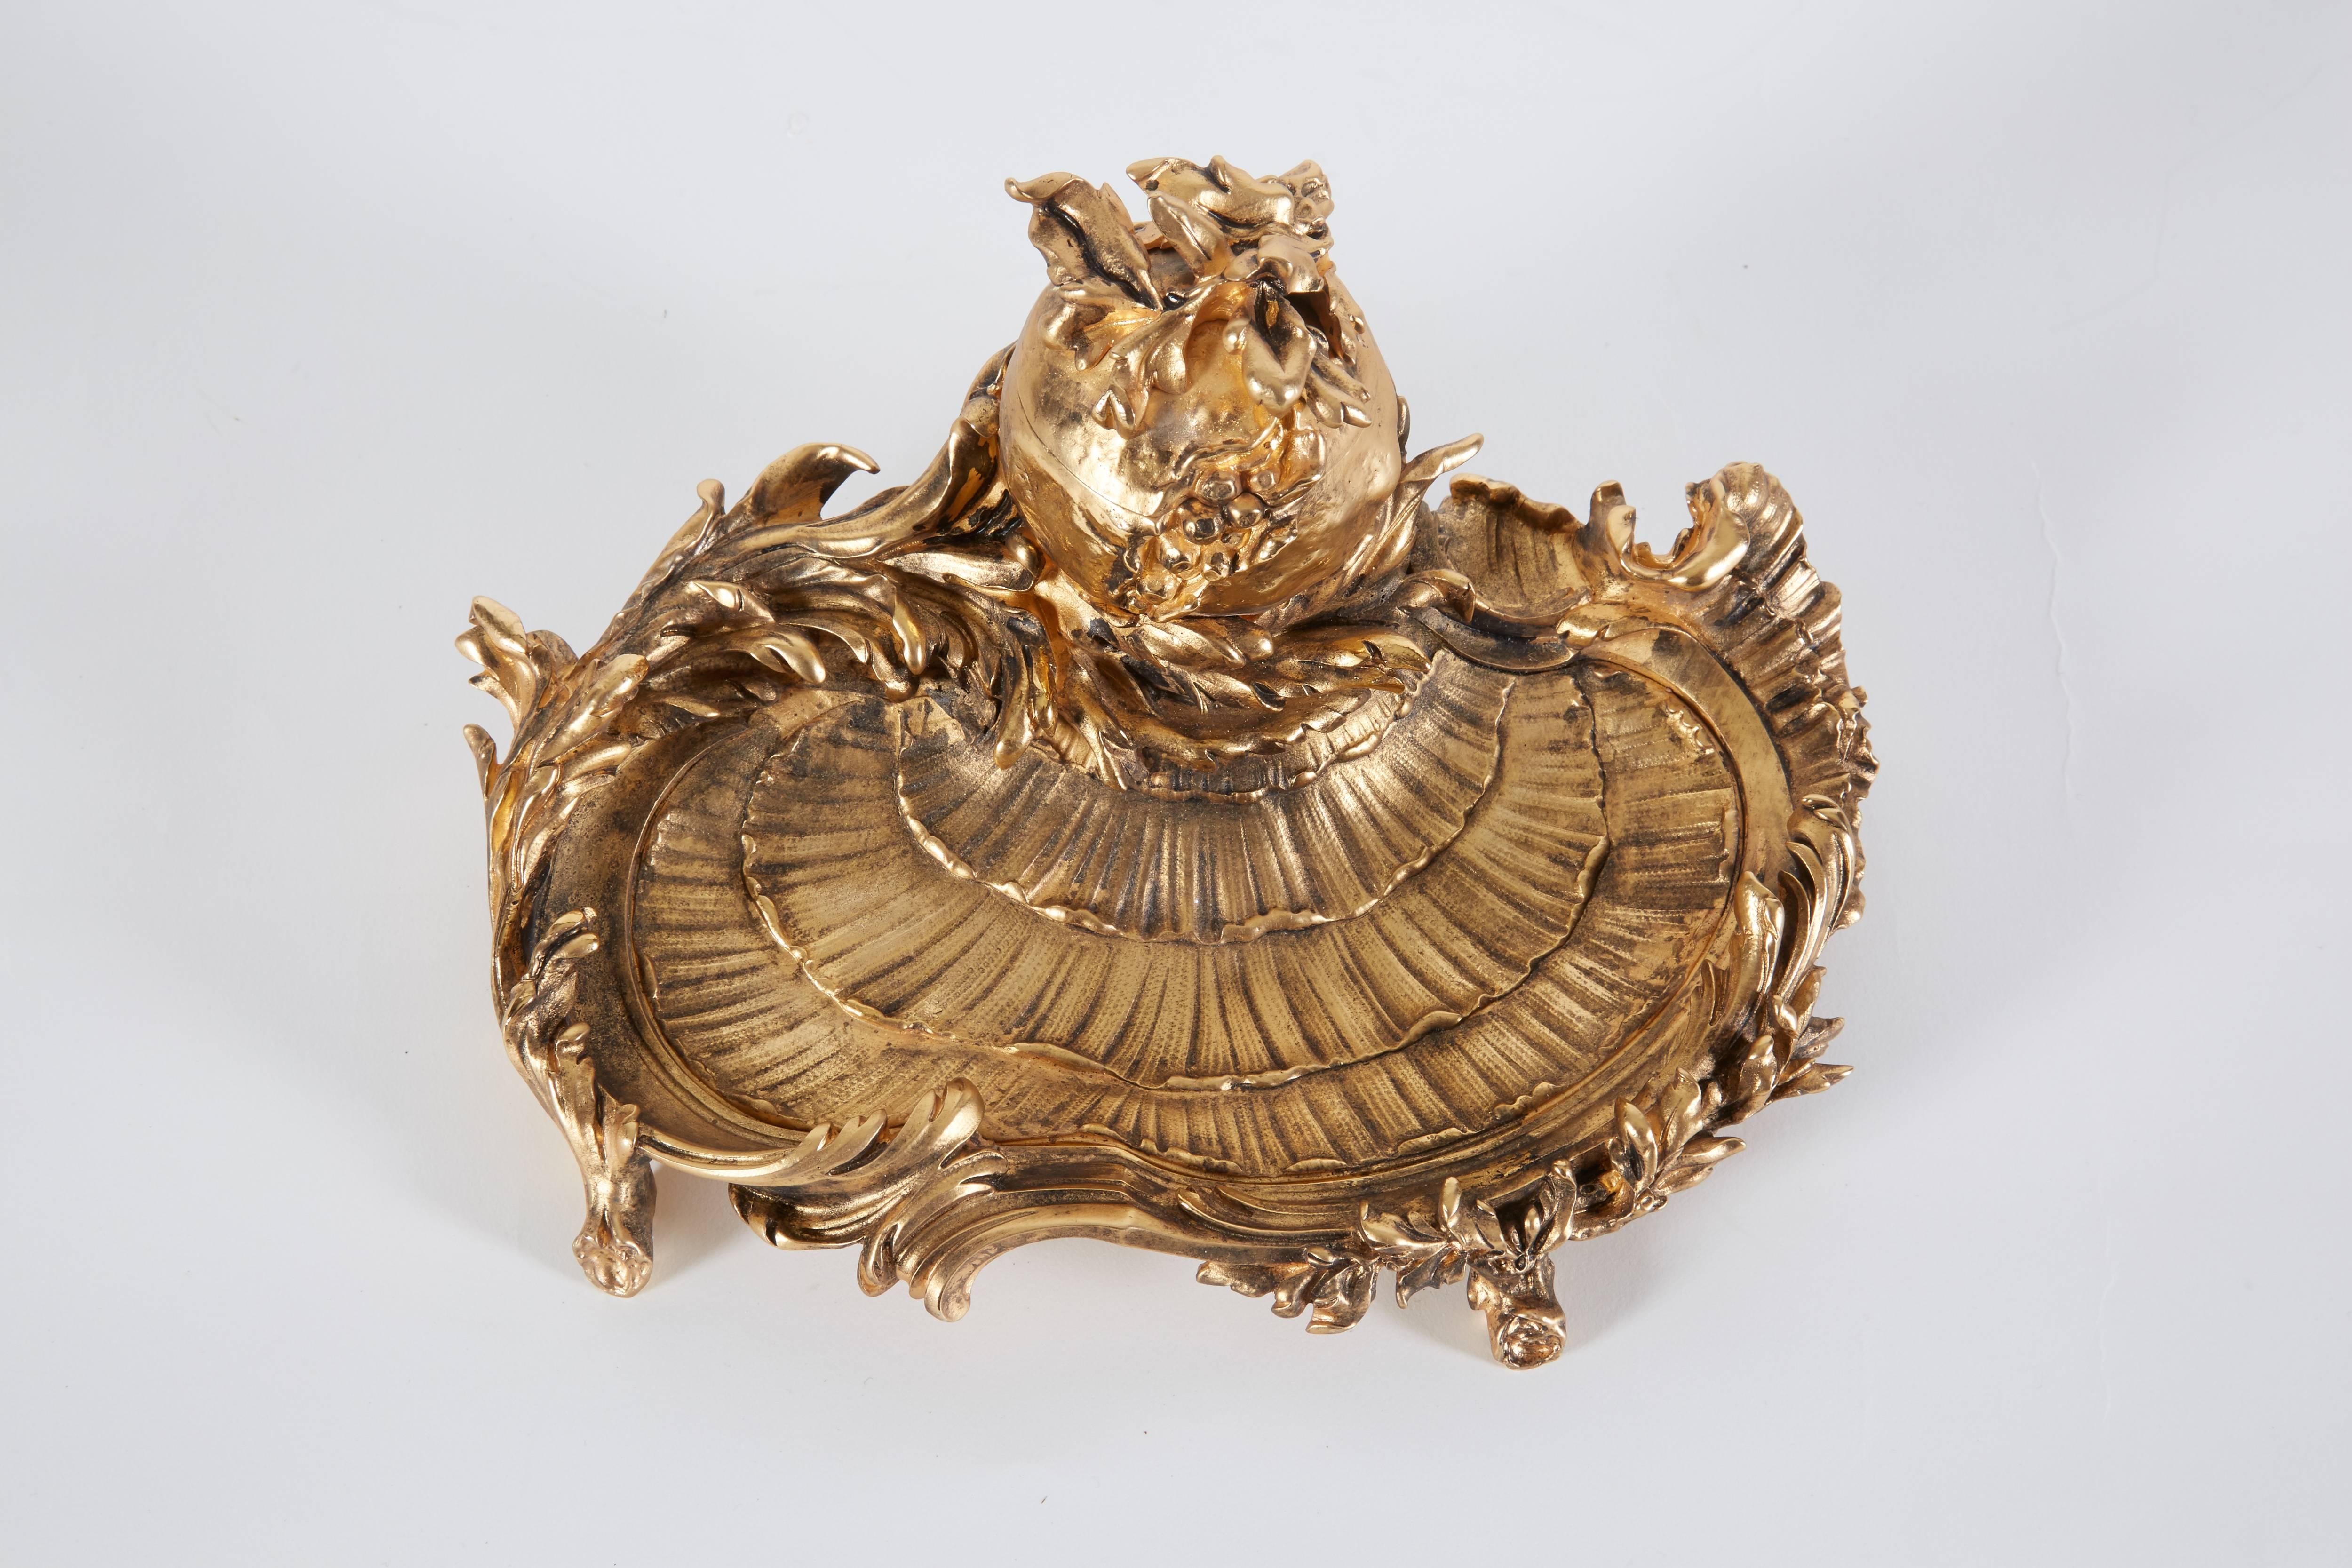 French bronze ormolu desk inkwell Encrier by Paul Sormani.

Late 19th century.

Signed P. Sormani Paris

Measures: 5